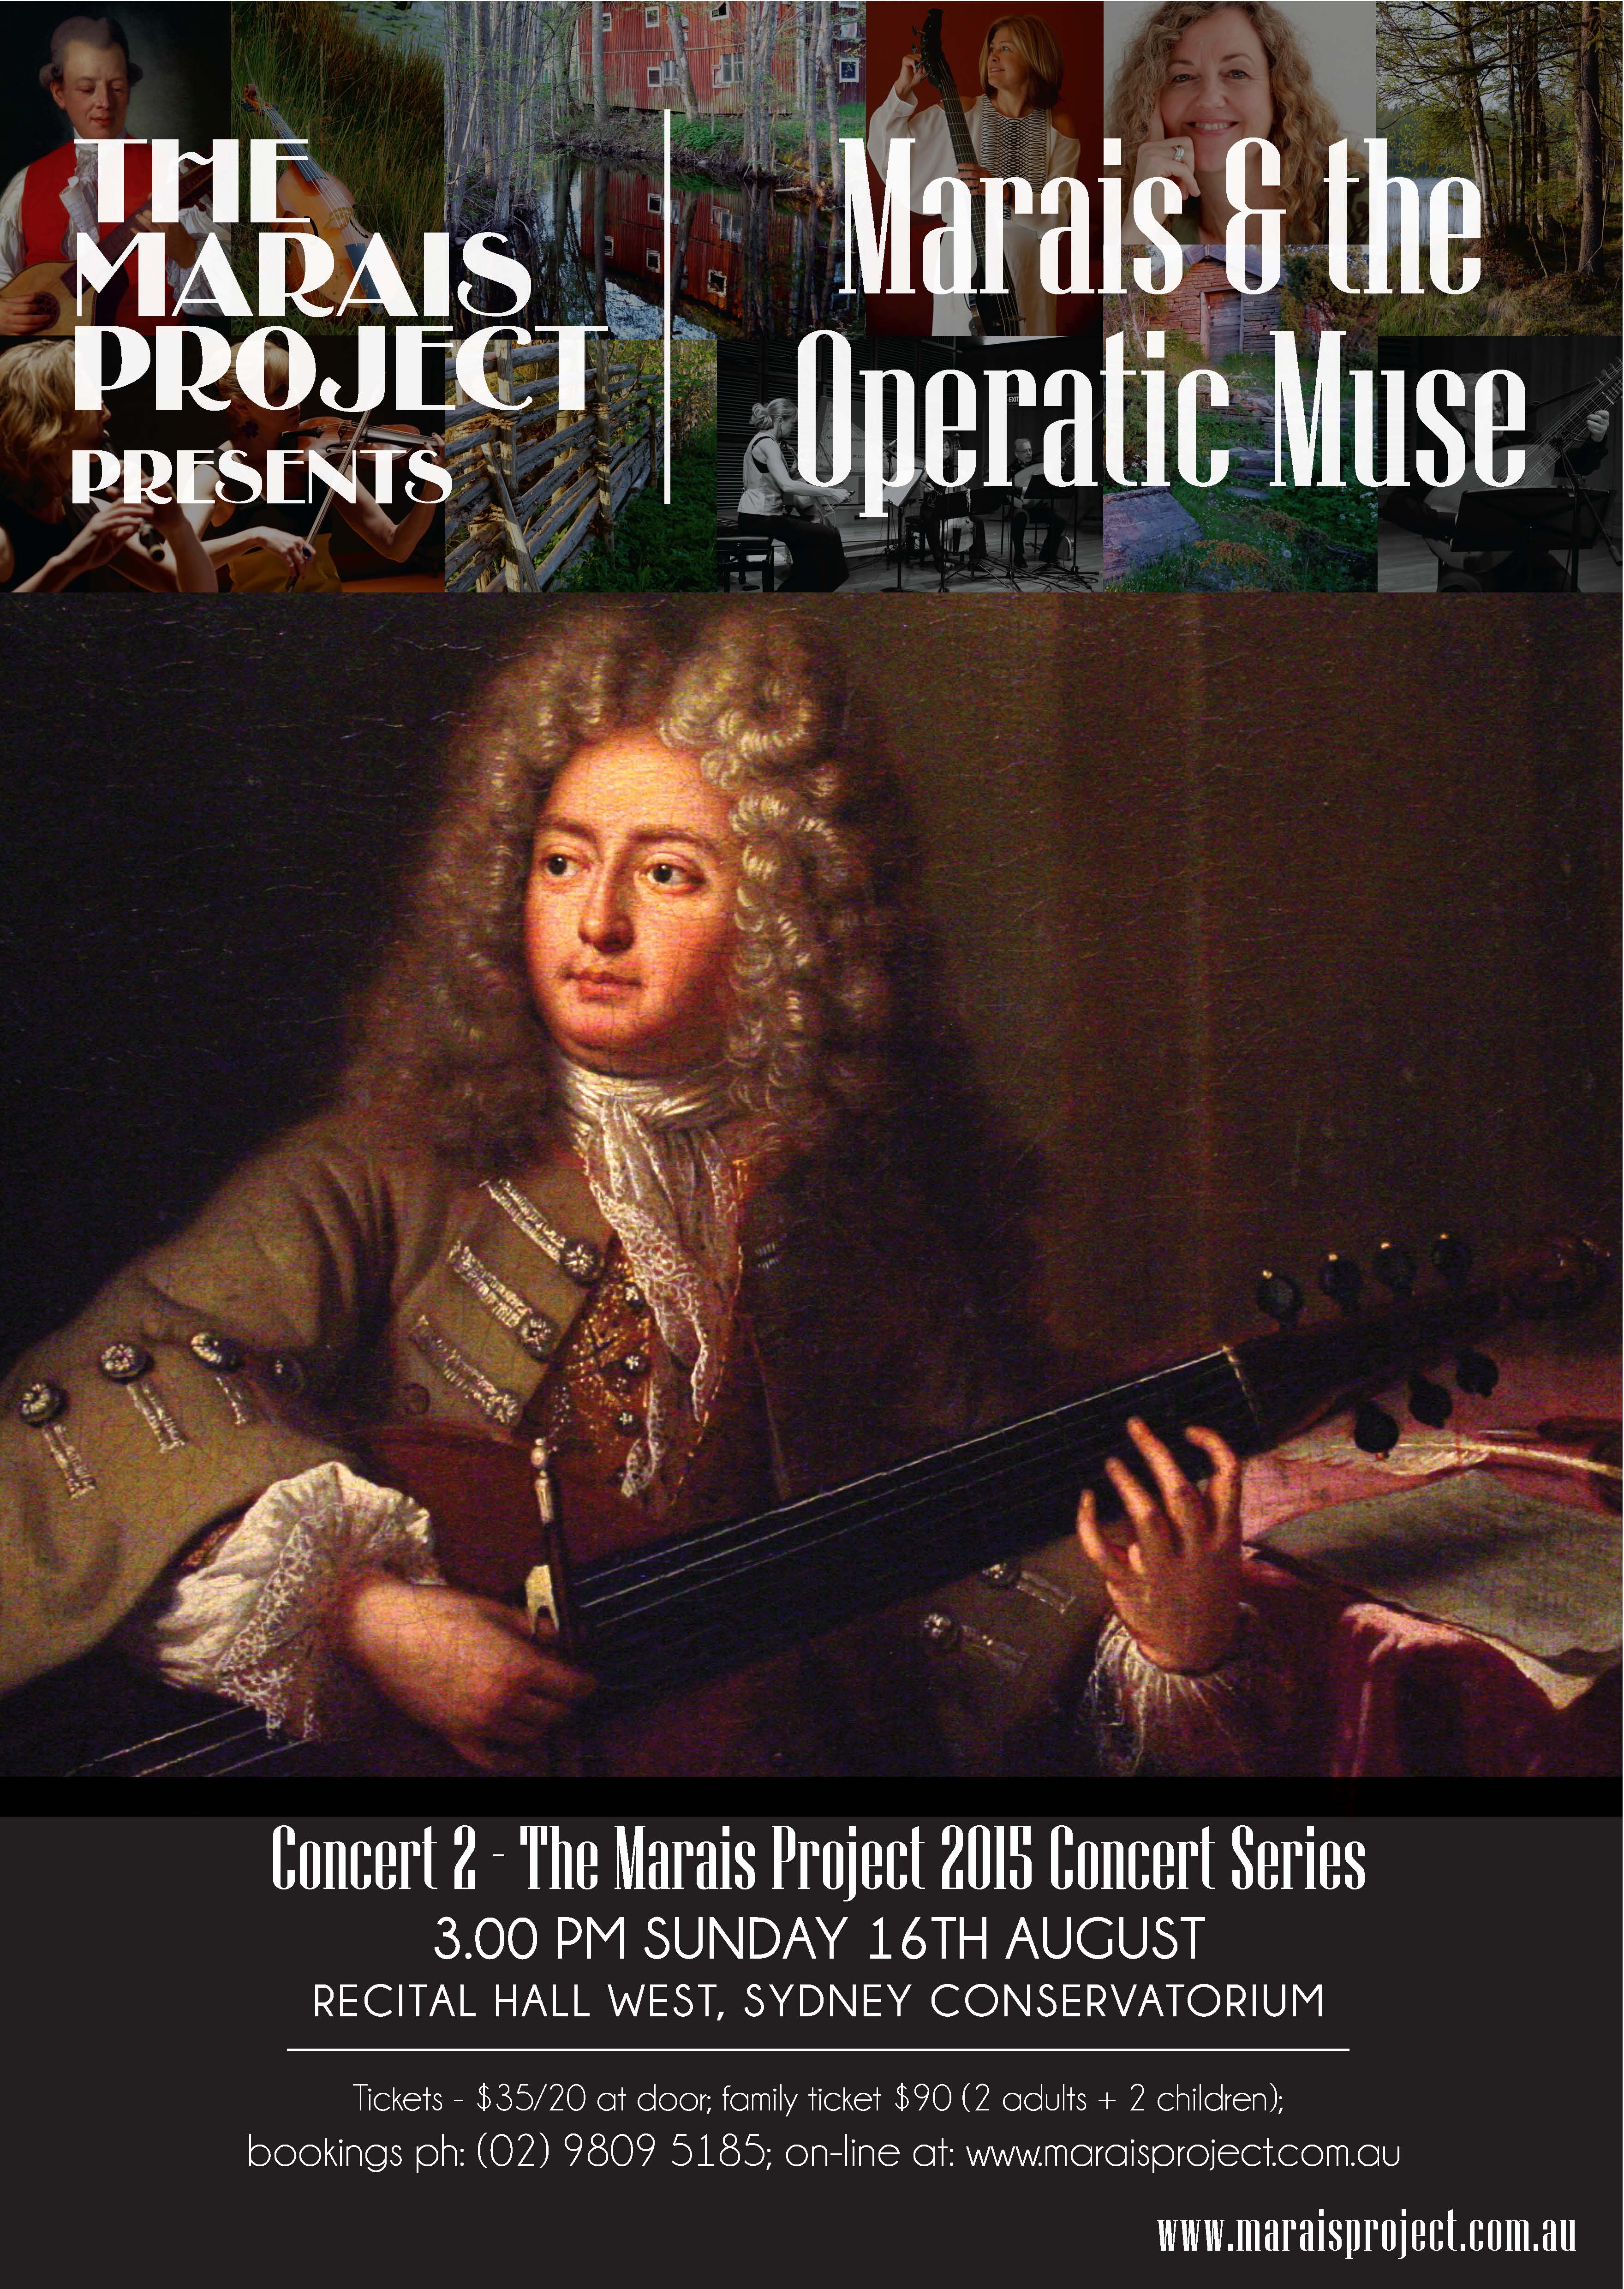 Marais And The Operatic Muse